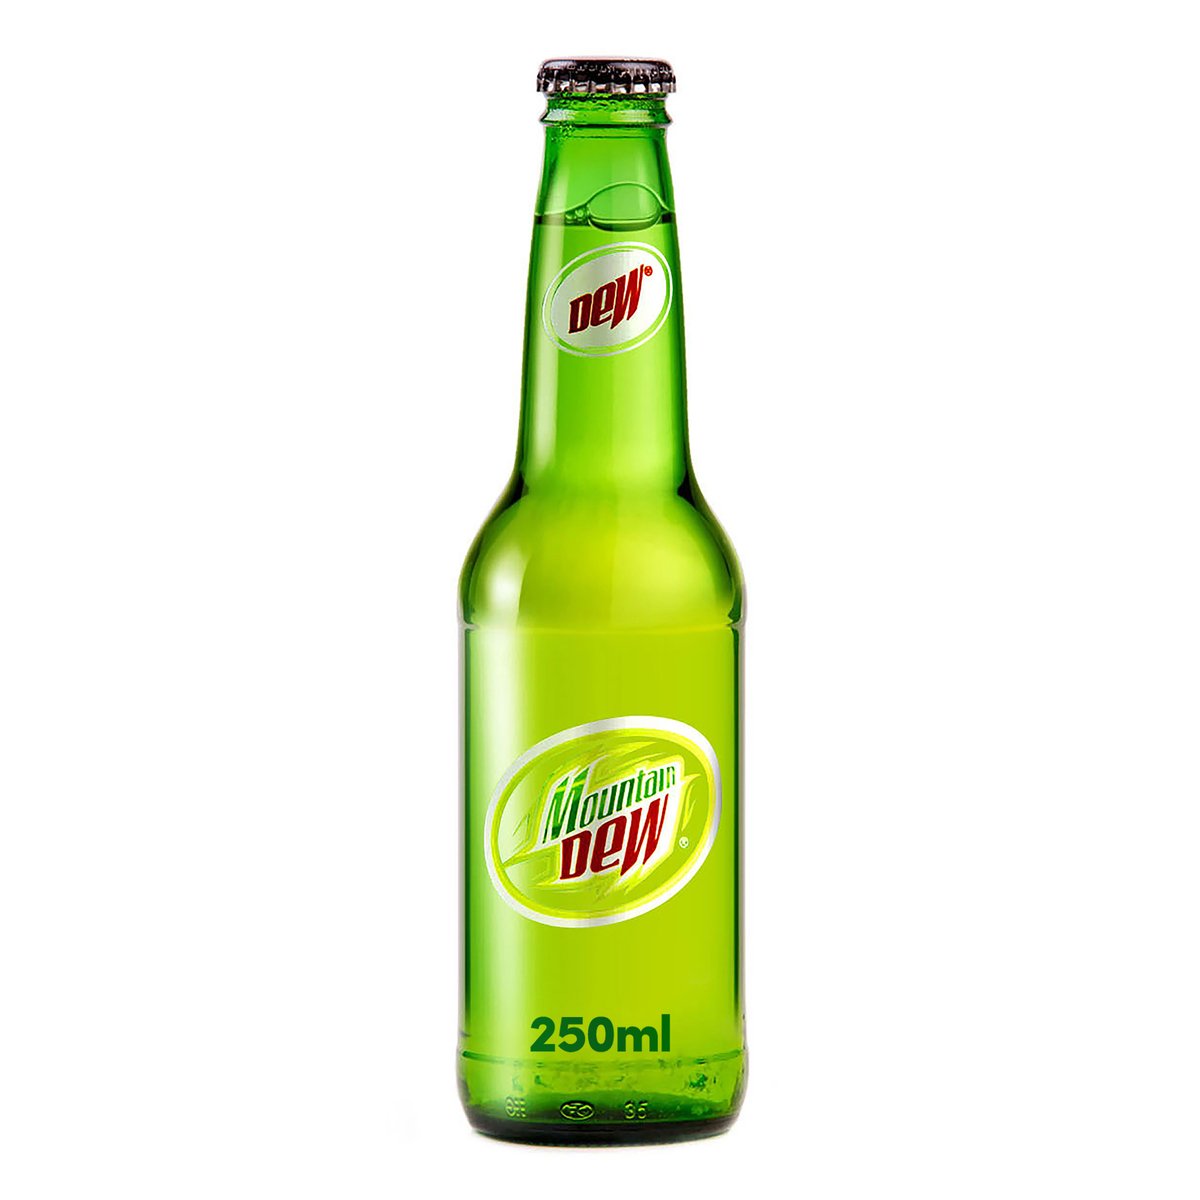 Mountain Dew Carbonated Soft Drink Glass Bottle 6 x 250 ml